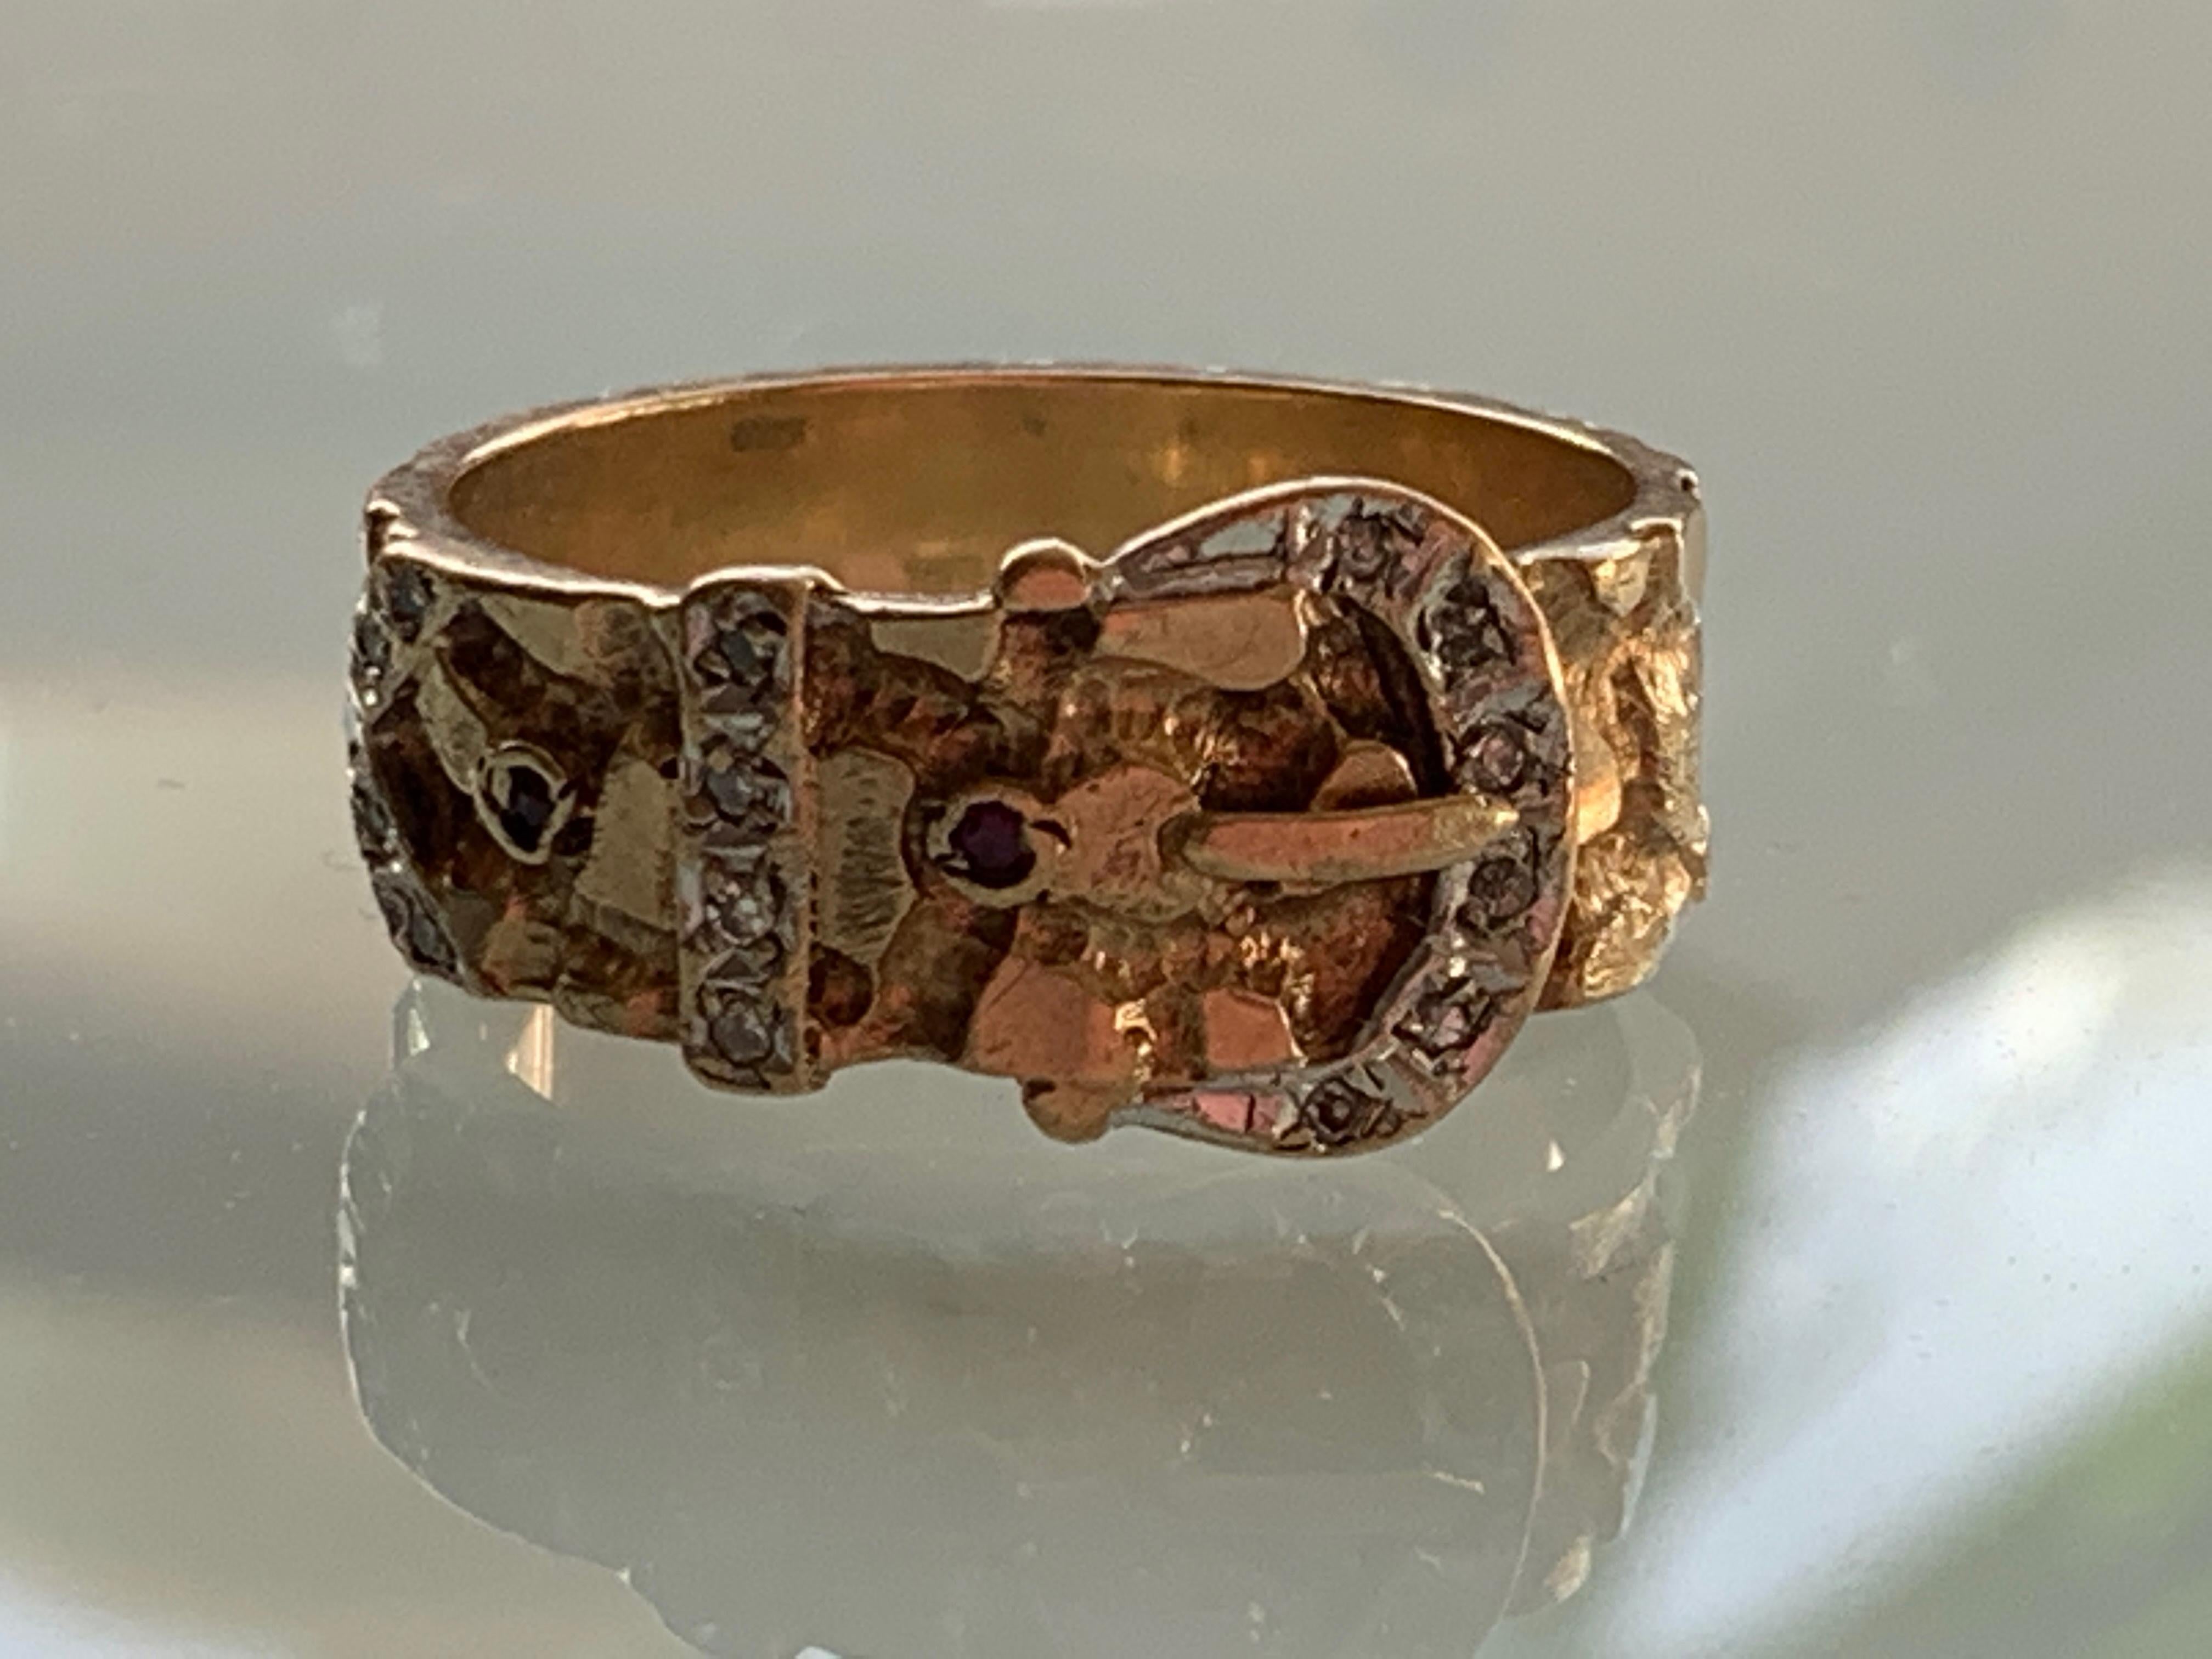 9ct Gold 1960s Buckle Ring
Bark surface design 
set with 15 x 0.8mm Natural diamonds
and 2 x 0.8mm Natural Rubies

Size
U.K Size U
U.S Size 10/4

Thickness - 7.8mm
Depth 1.2mm
inner diametre 20mm
inner circumference 62.2mm
